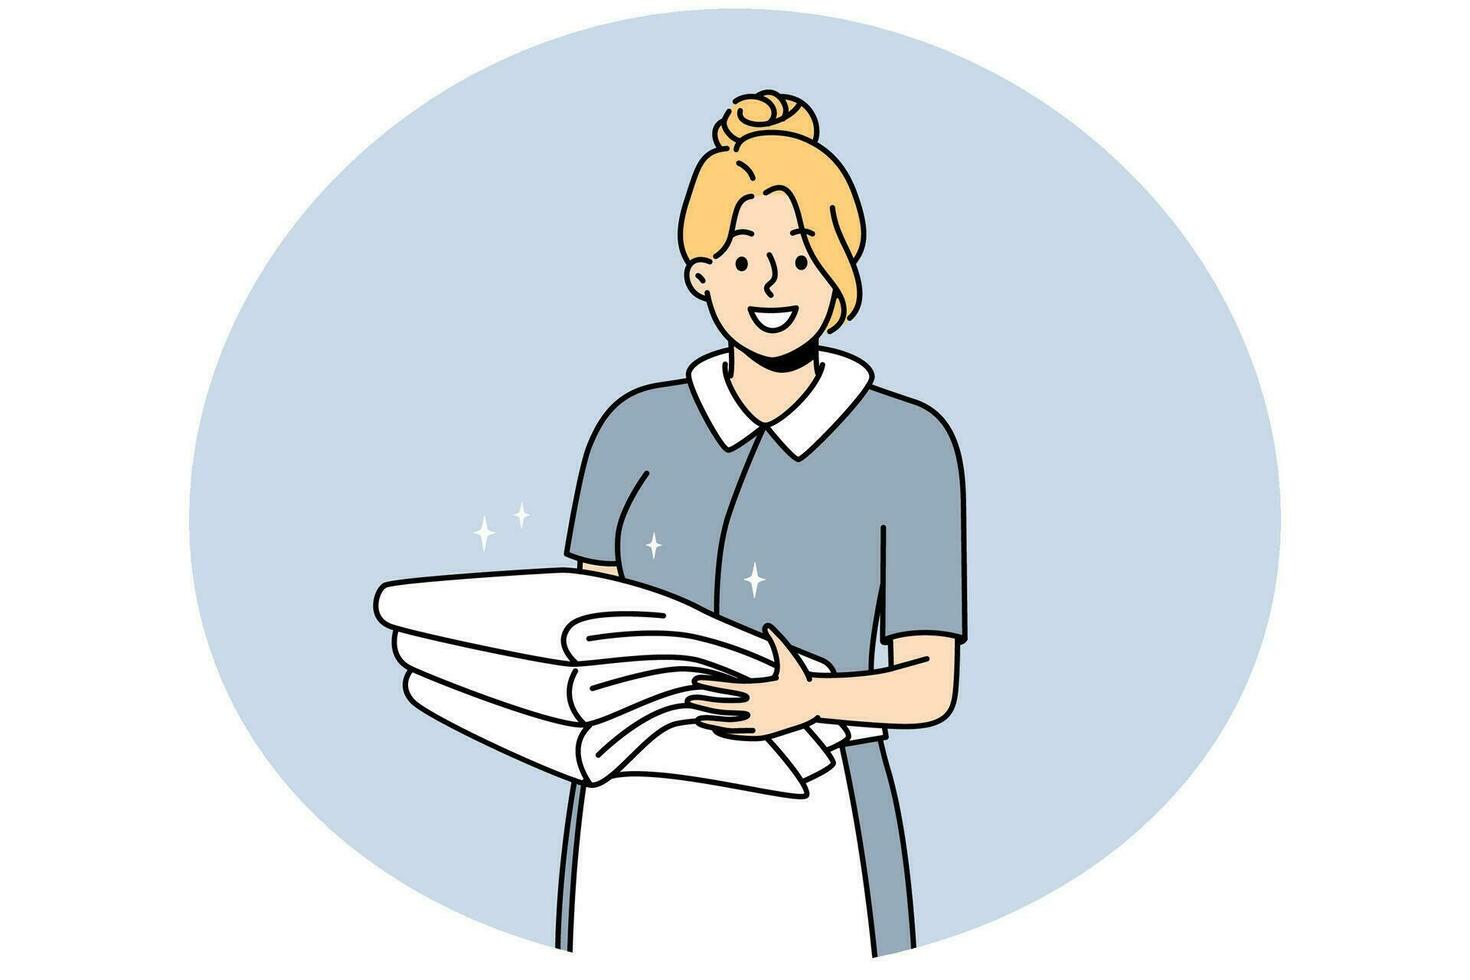 Smiling housekeeper in uniform holding stack of towels. Happy female housemaid or janitor working in hotel. Housekeeping concept. Vector illustration.